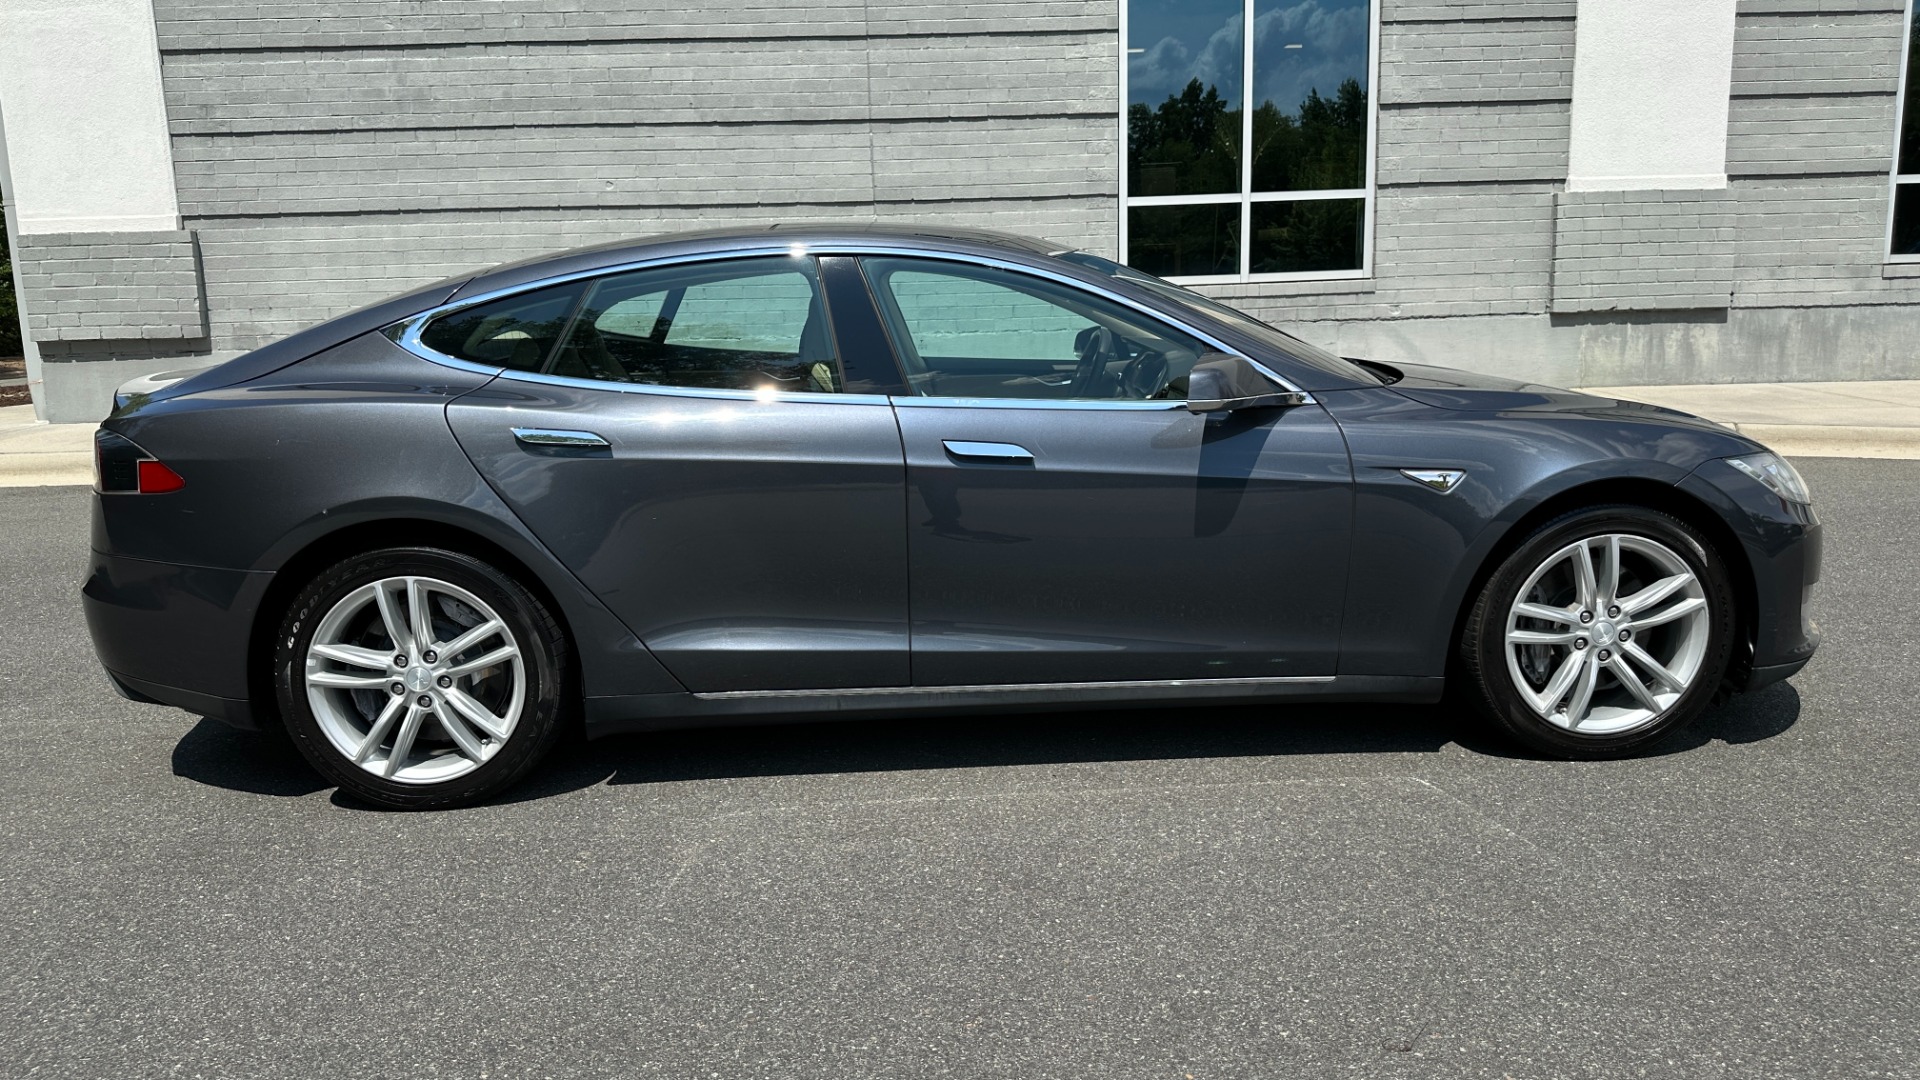 Used 2014 Tesla Model S 60 kWh Battery / 60D / PREMIUM CONNECTIVITY / LEATHER / SUNROOF for sale $22,995 at Formula Imports in Charlotte NC 28227 8